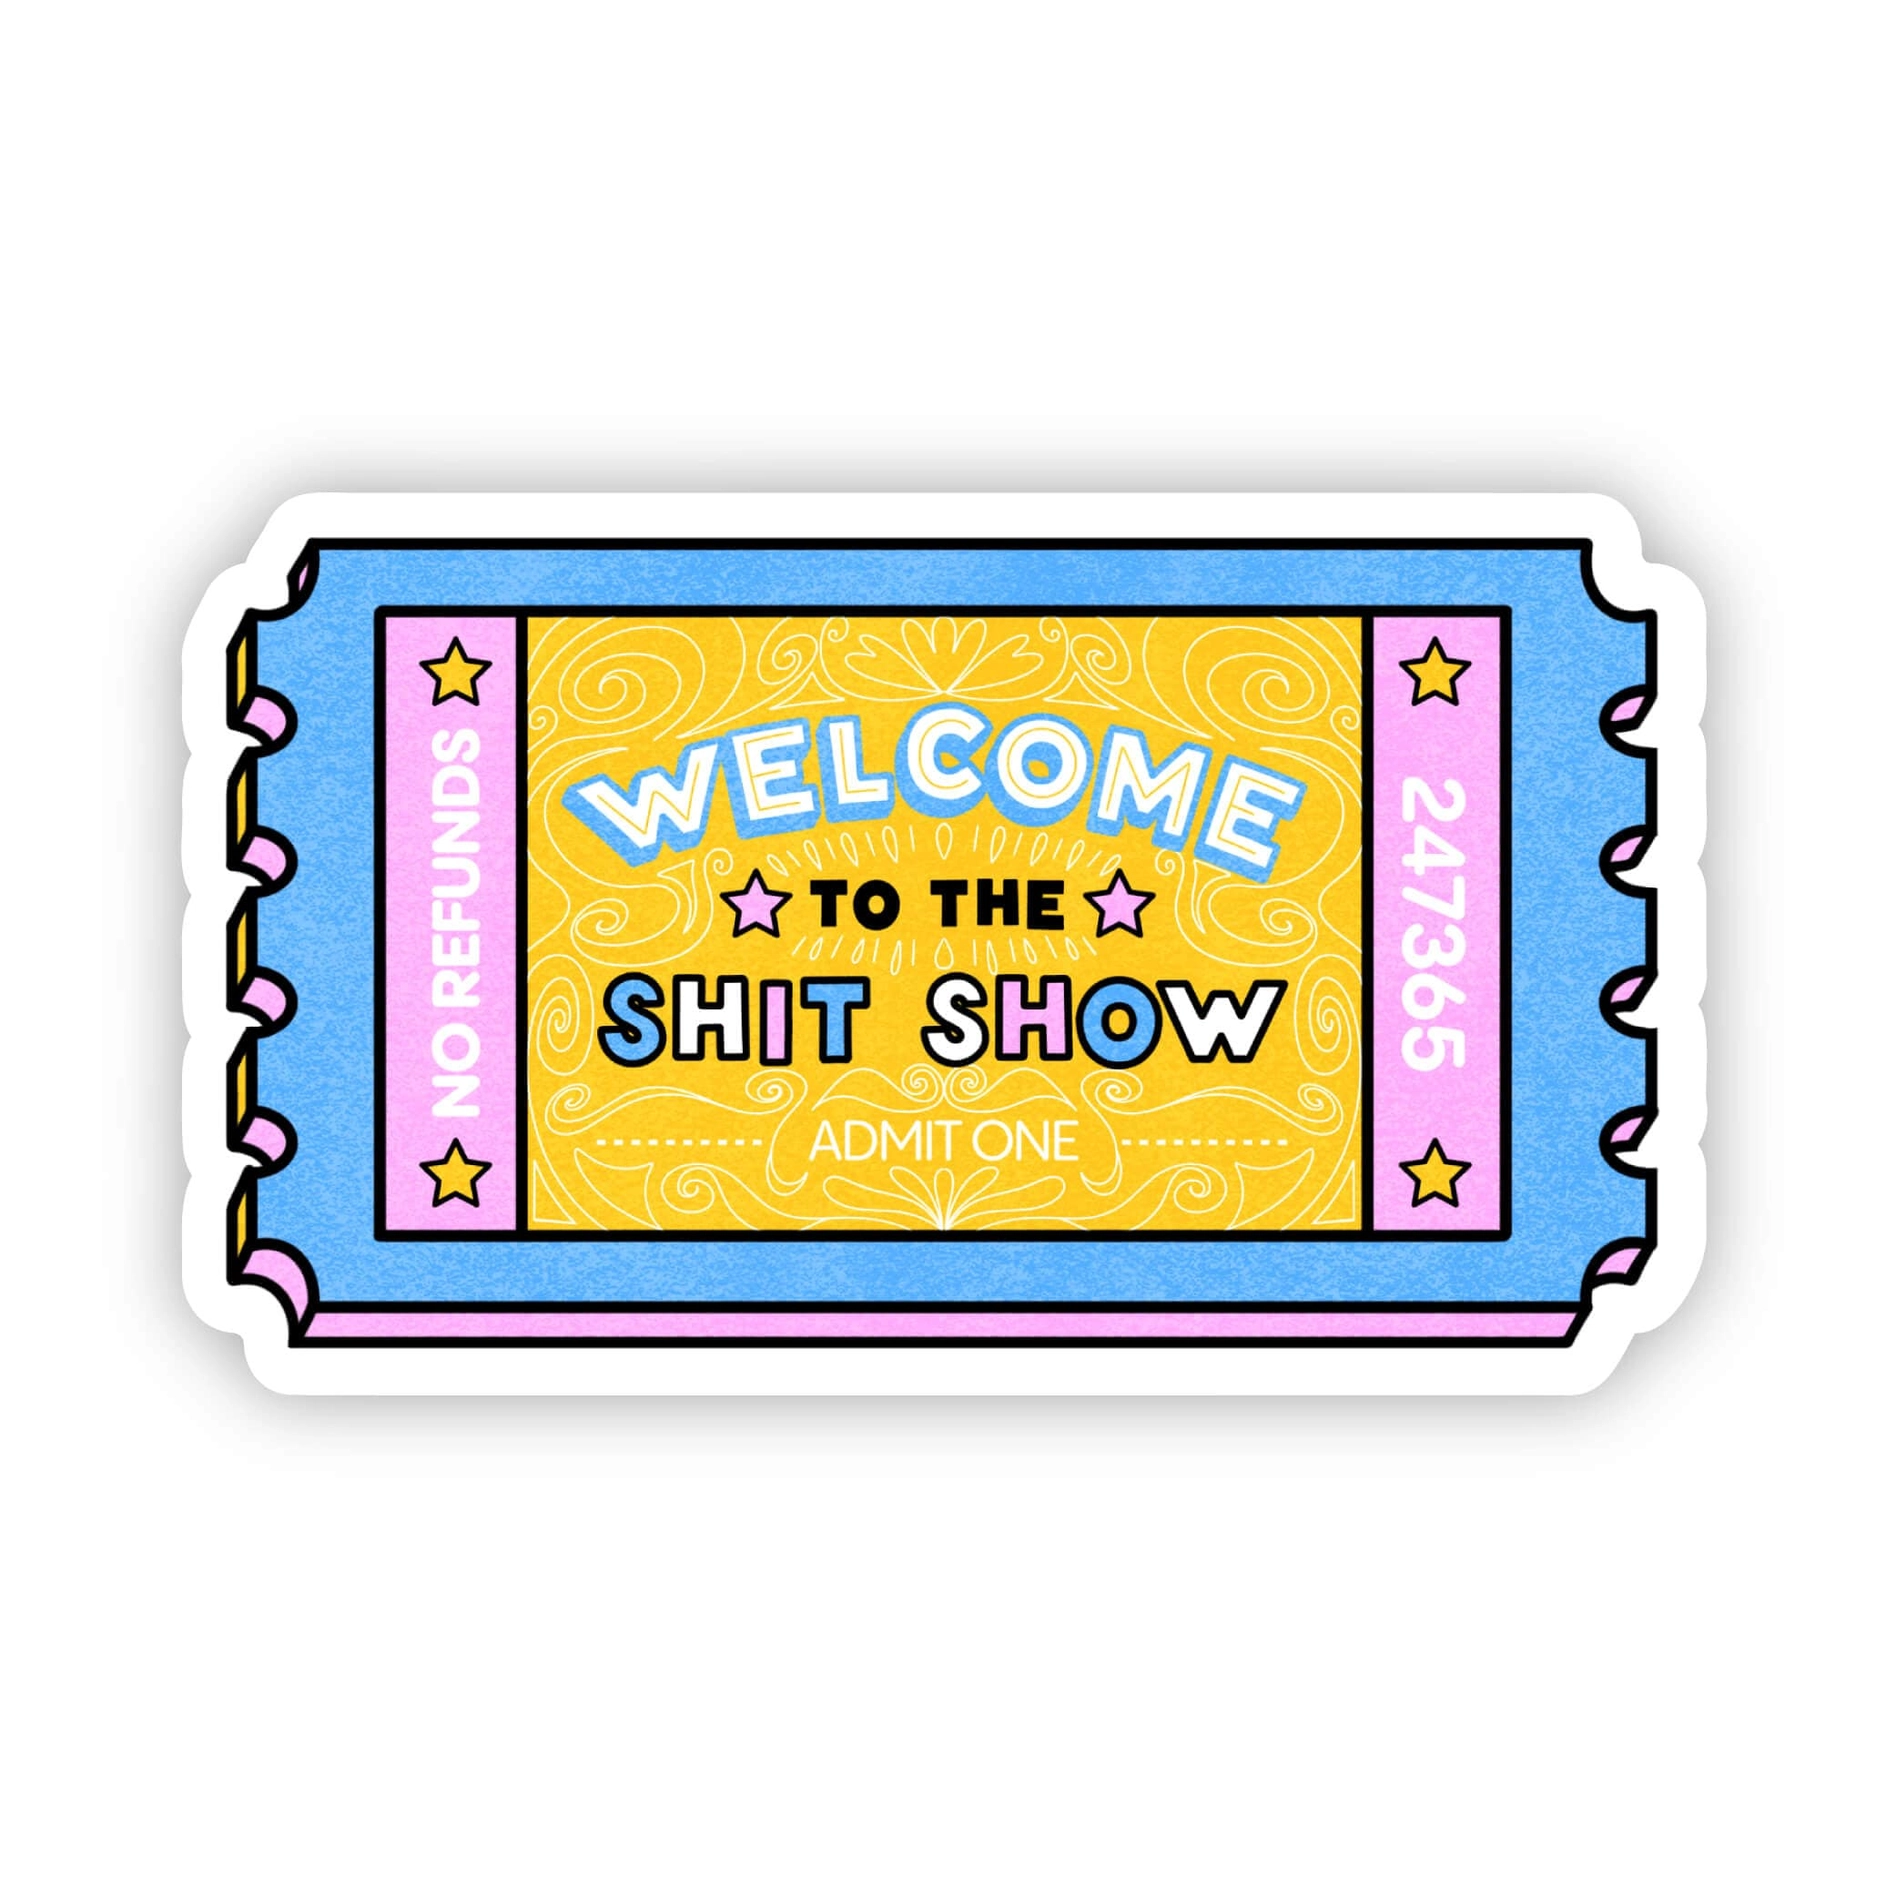 Shit Show Ticket Sticker - Heart of the Home LV